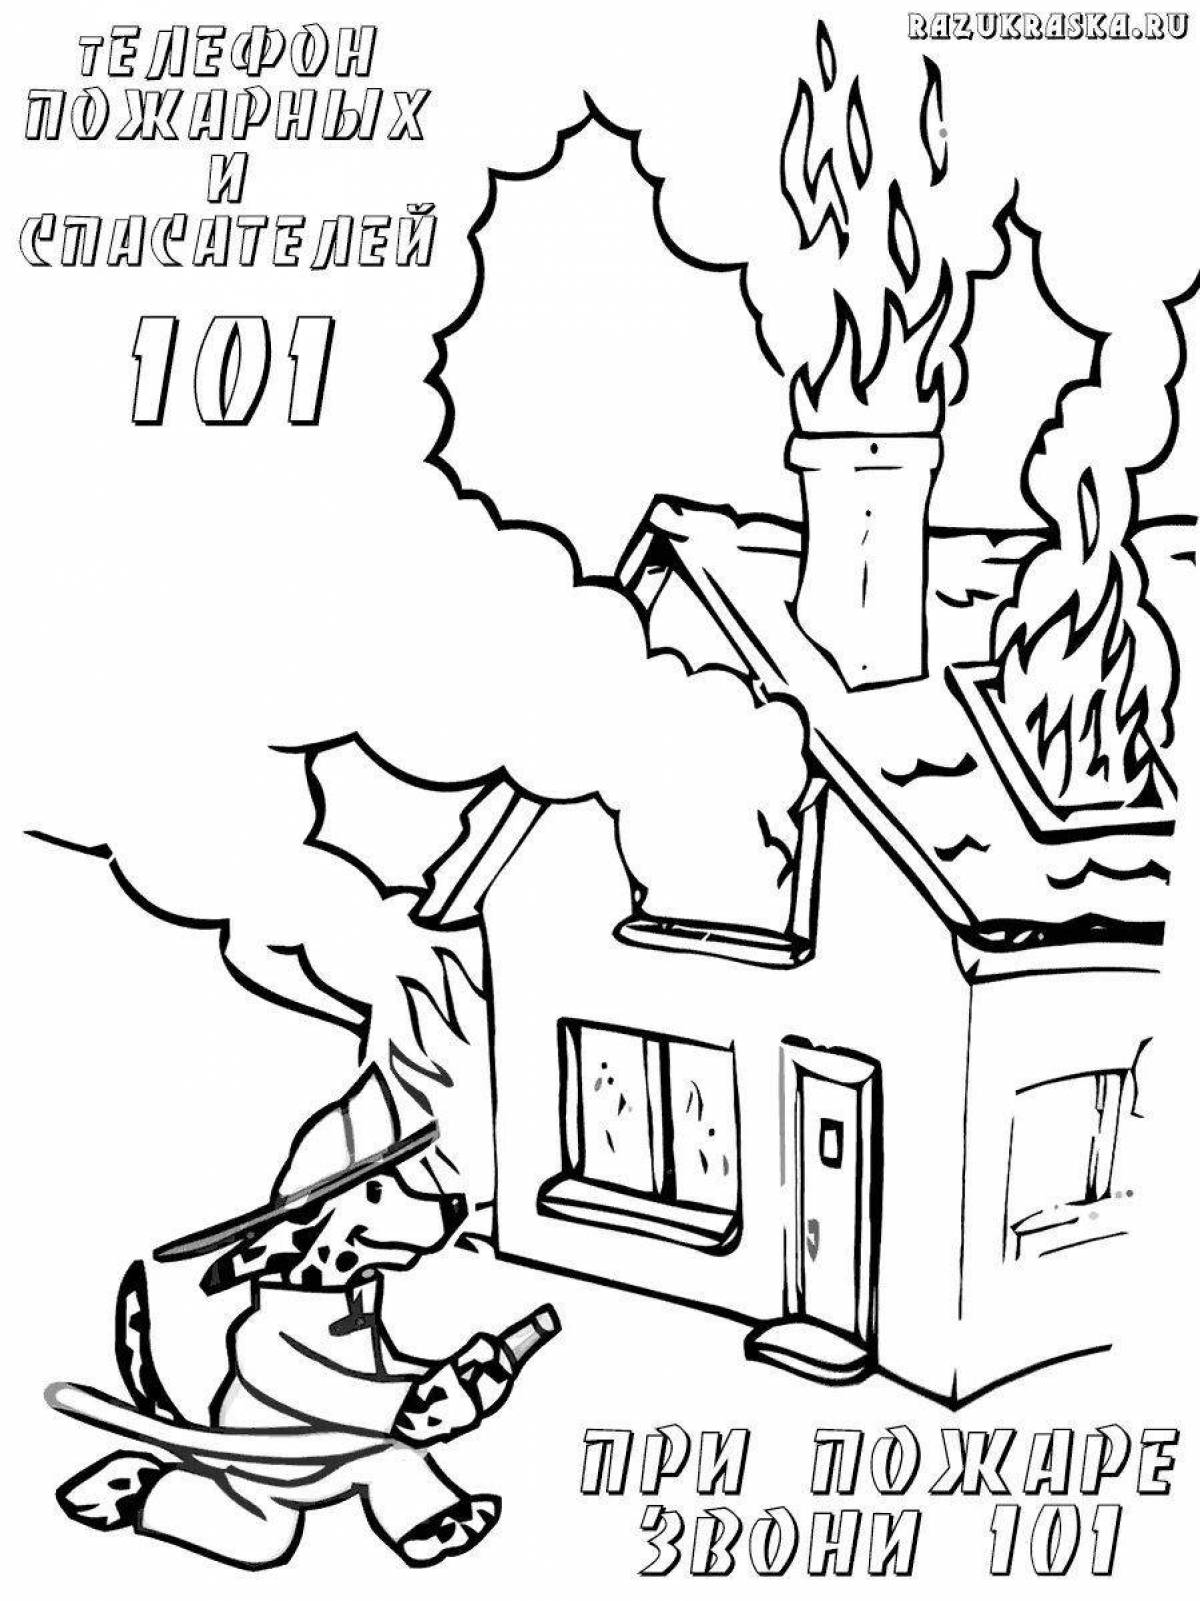 Fun coloring book for fire safety